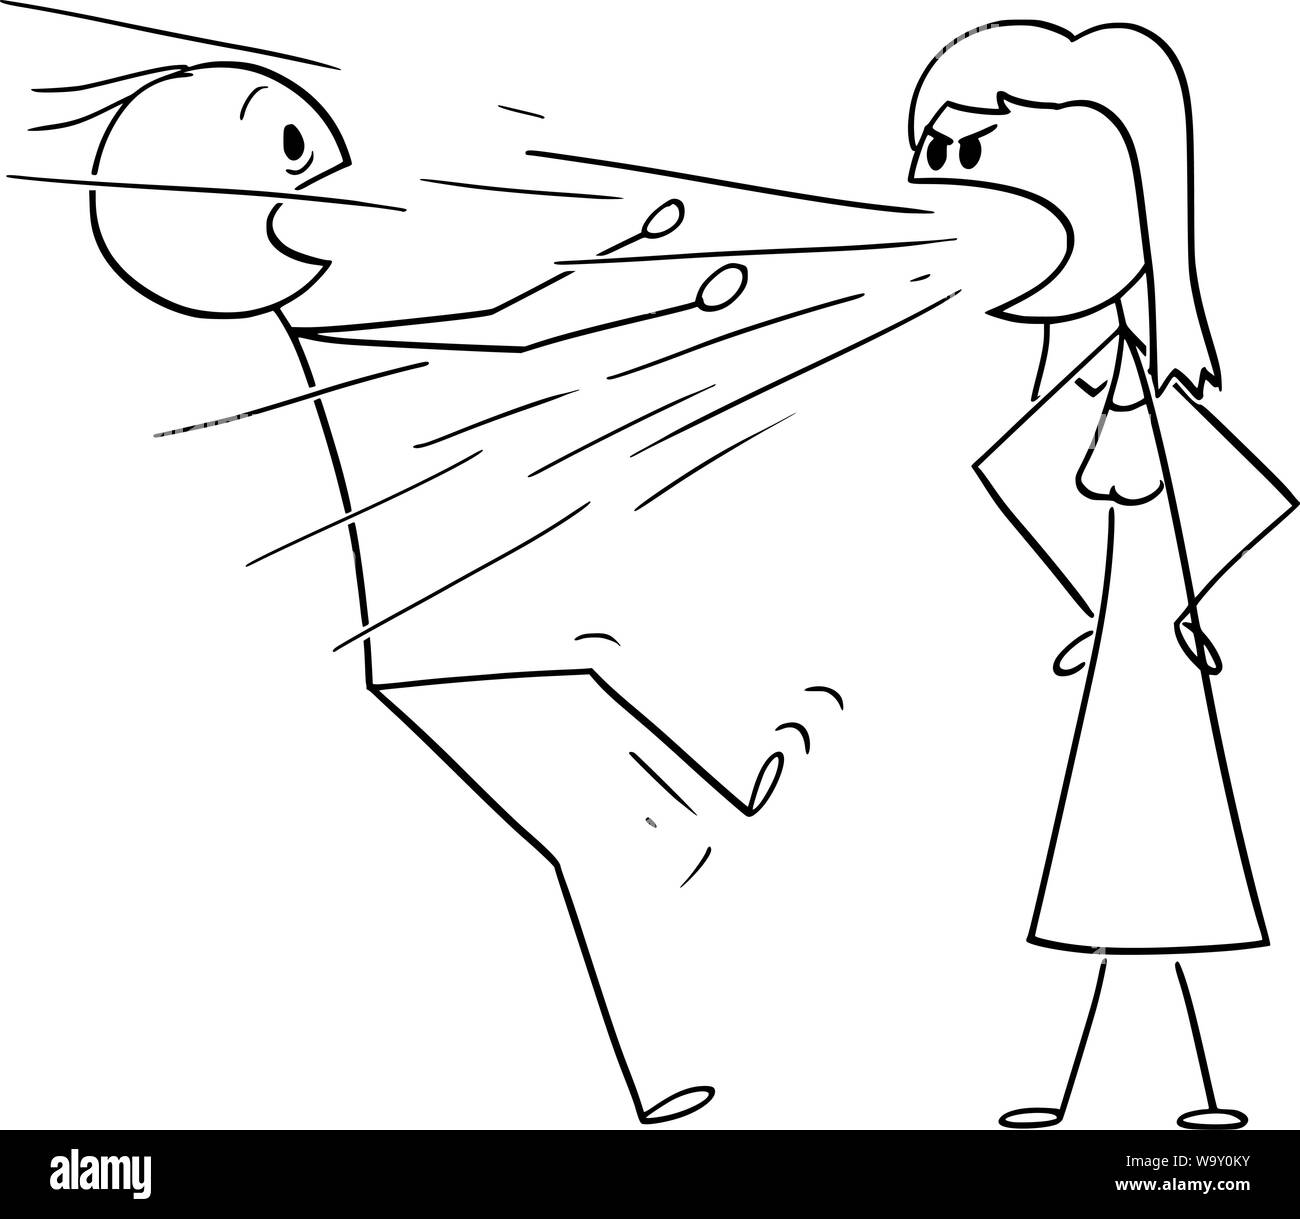 Vector cartoon stick figure drawing conceptual illustration of woman yelling or screaming at man.Concept or couple relationship. Stock Vector